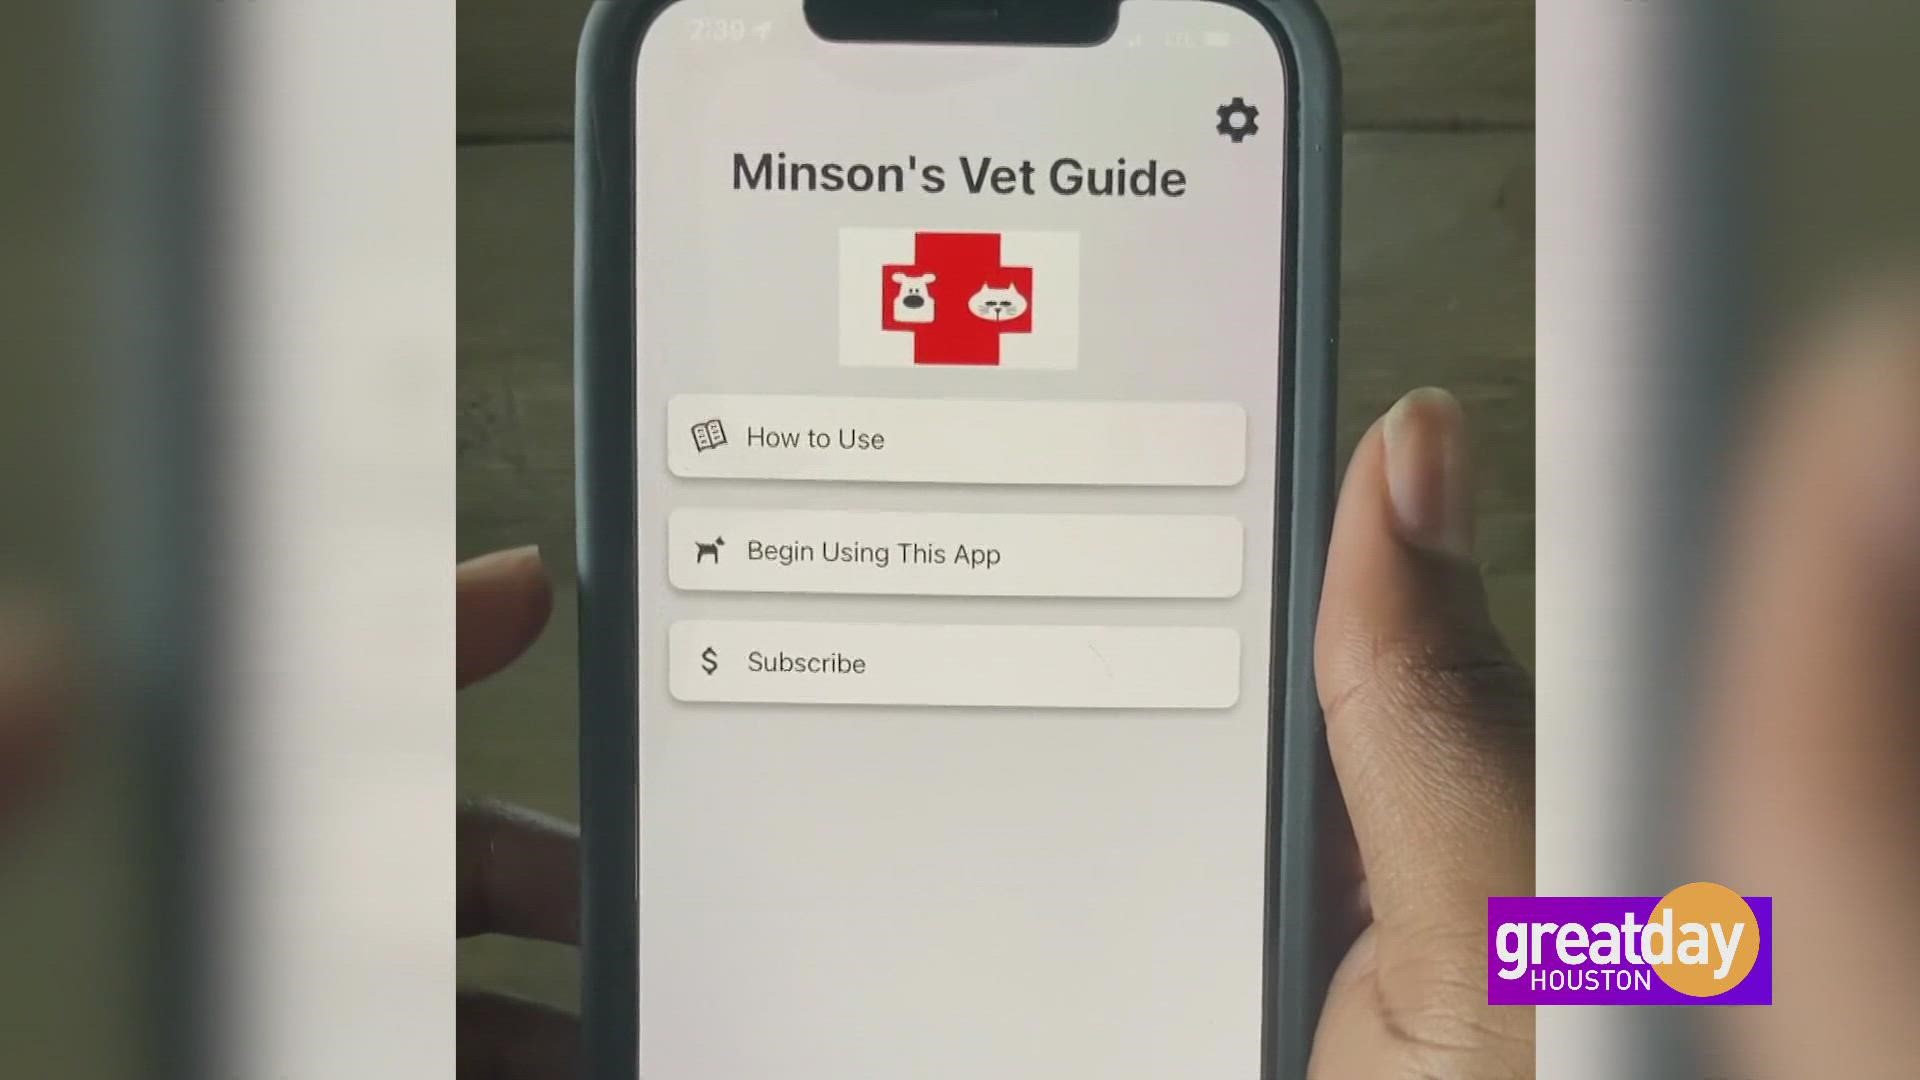 A few quick taps on the Minson's Vet Guide app can help find the closest 24 hour emergency veterinary hospital, so no matter where you are, your pets are protected